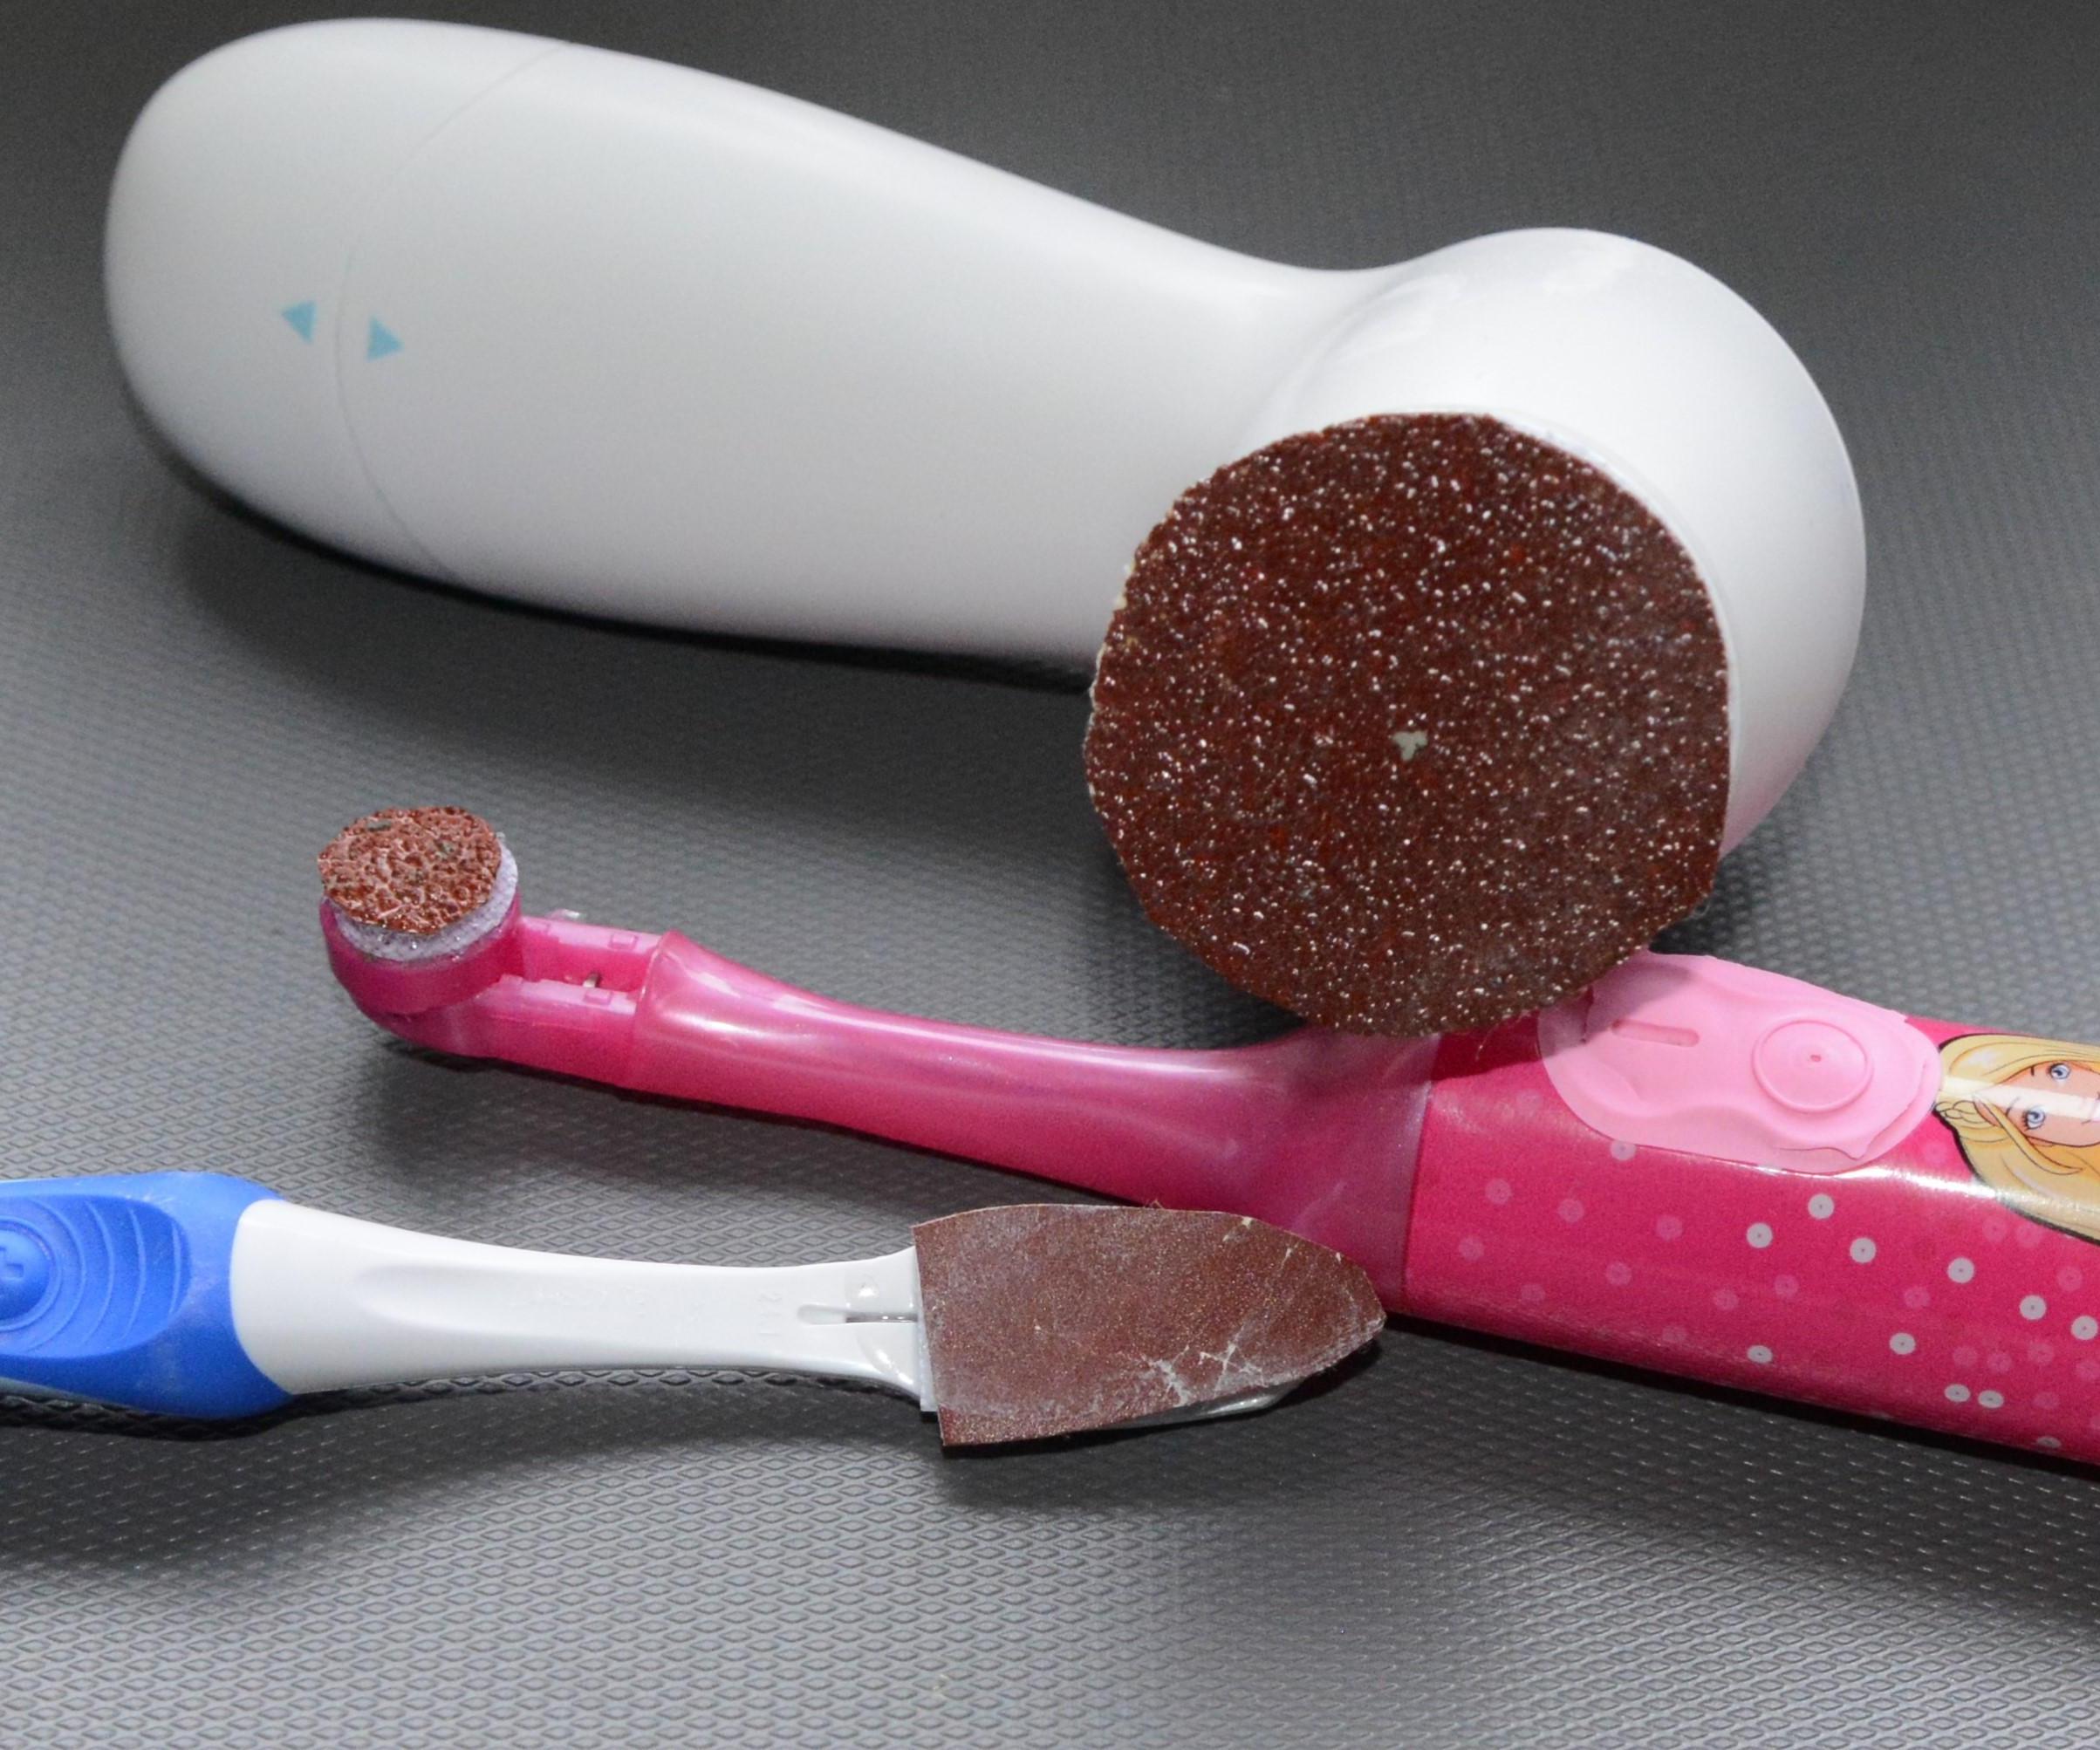 CONVERT OLD TOOTHBRUSHES INTO MINIATURE ELECTRIC SANDERS 